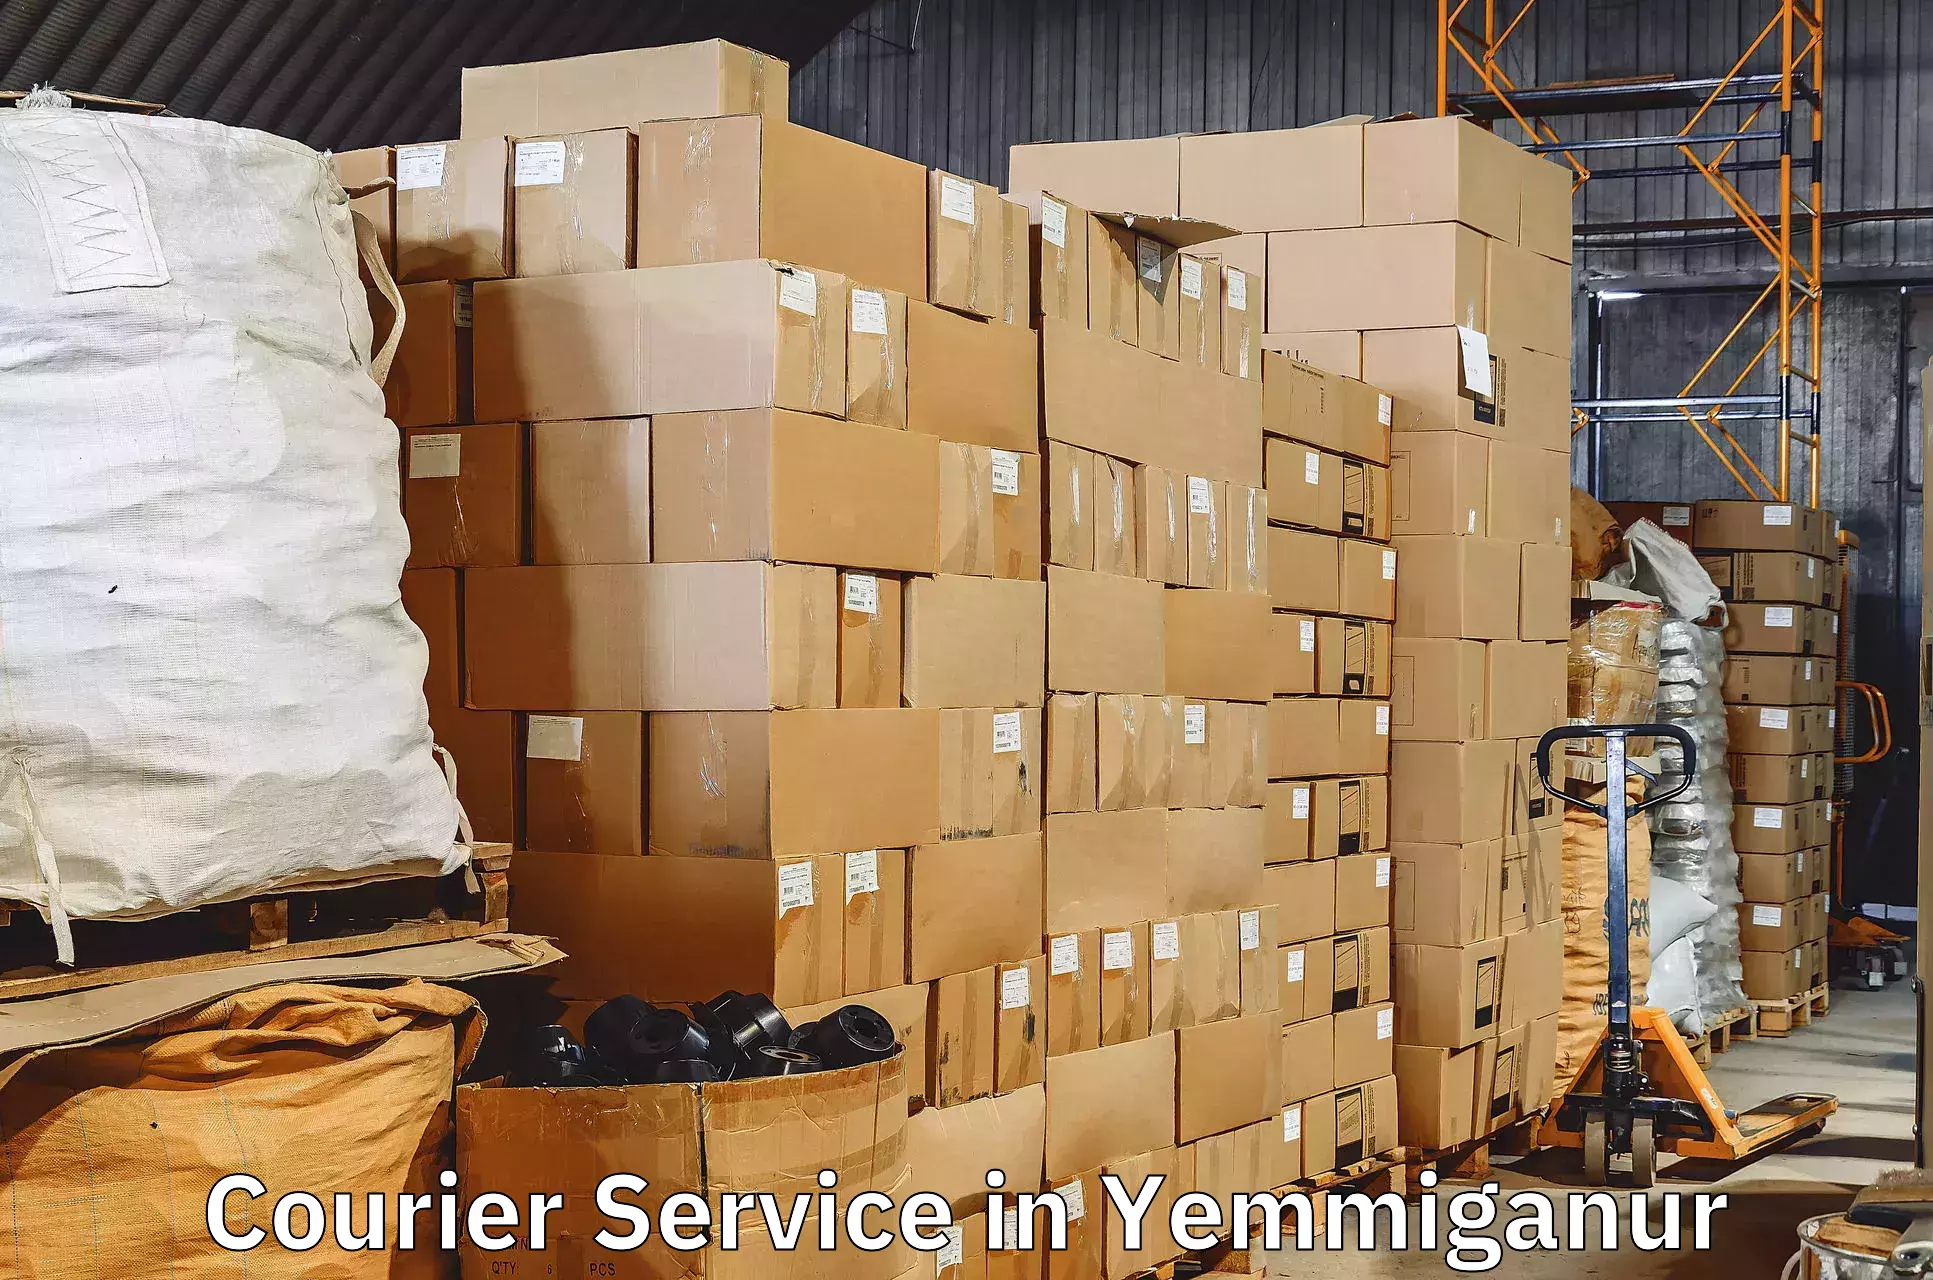 Cost-effective freight solutions in Yemmiganur